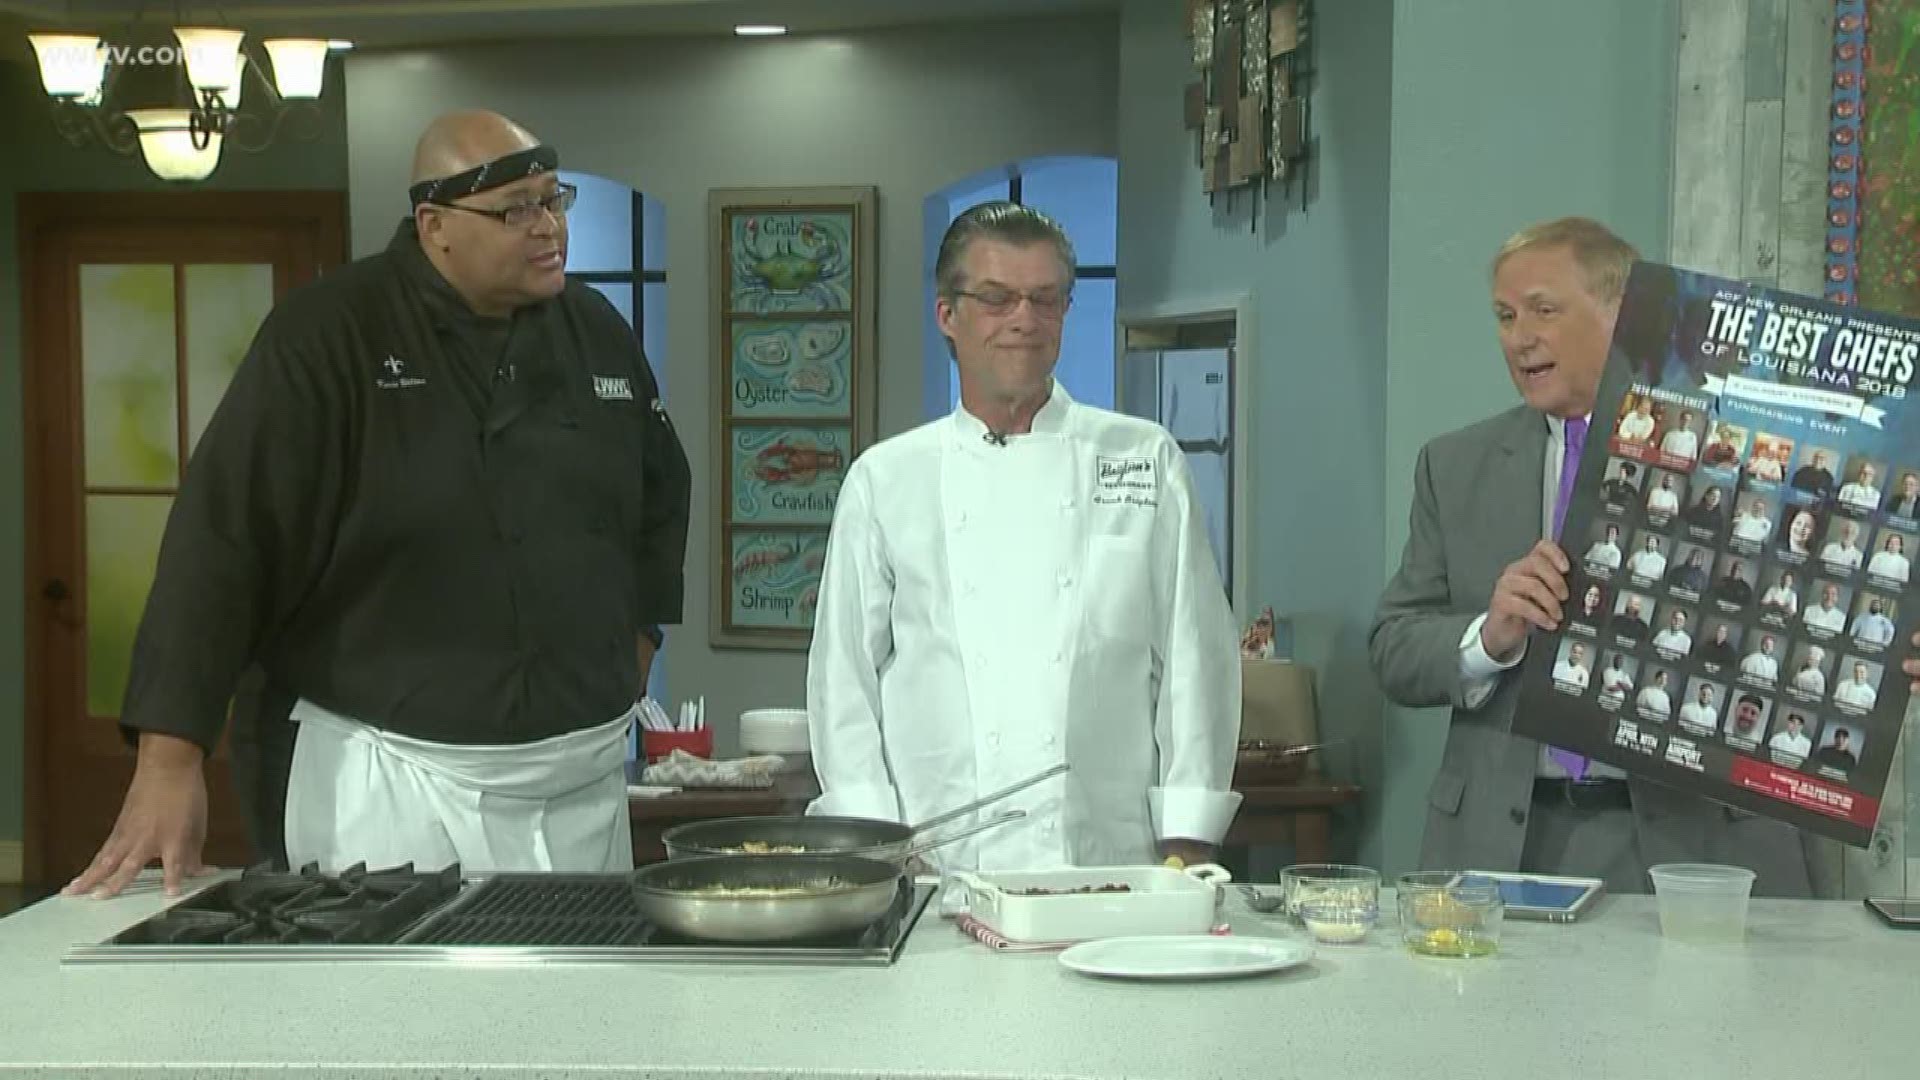 We are in the kitchen with Chef Kevin Belton and Chef Frank Brigtsen because they are among the chefs being honored at the American Culinary Foundation New Orleans Chapter's Best Chefs Event. 